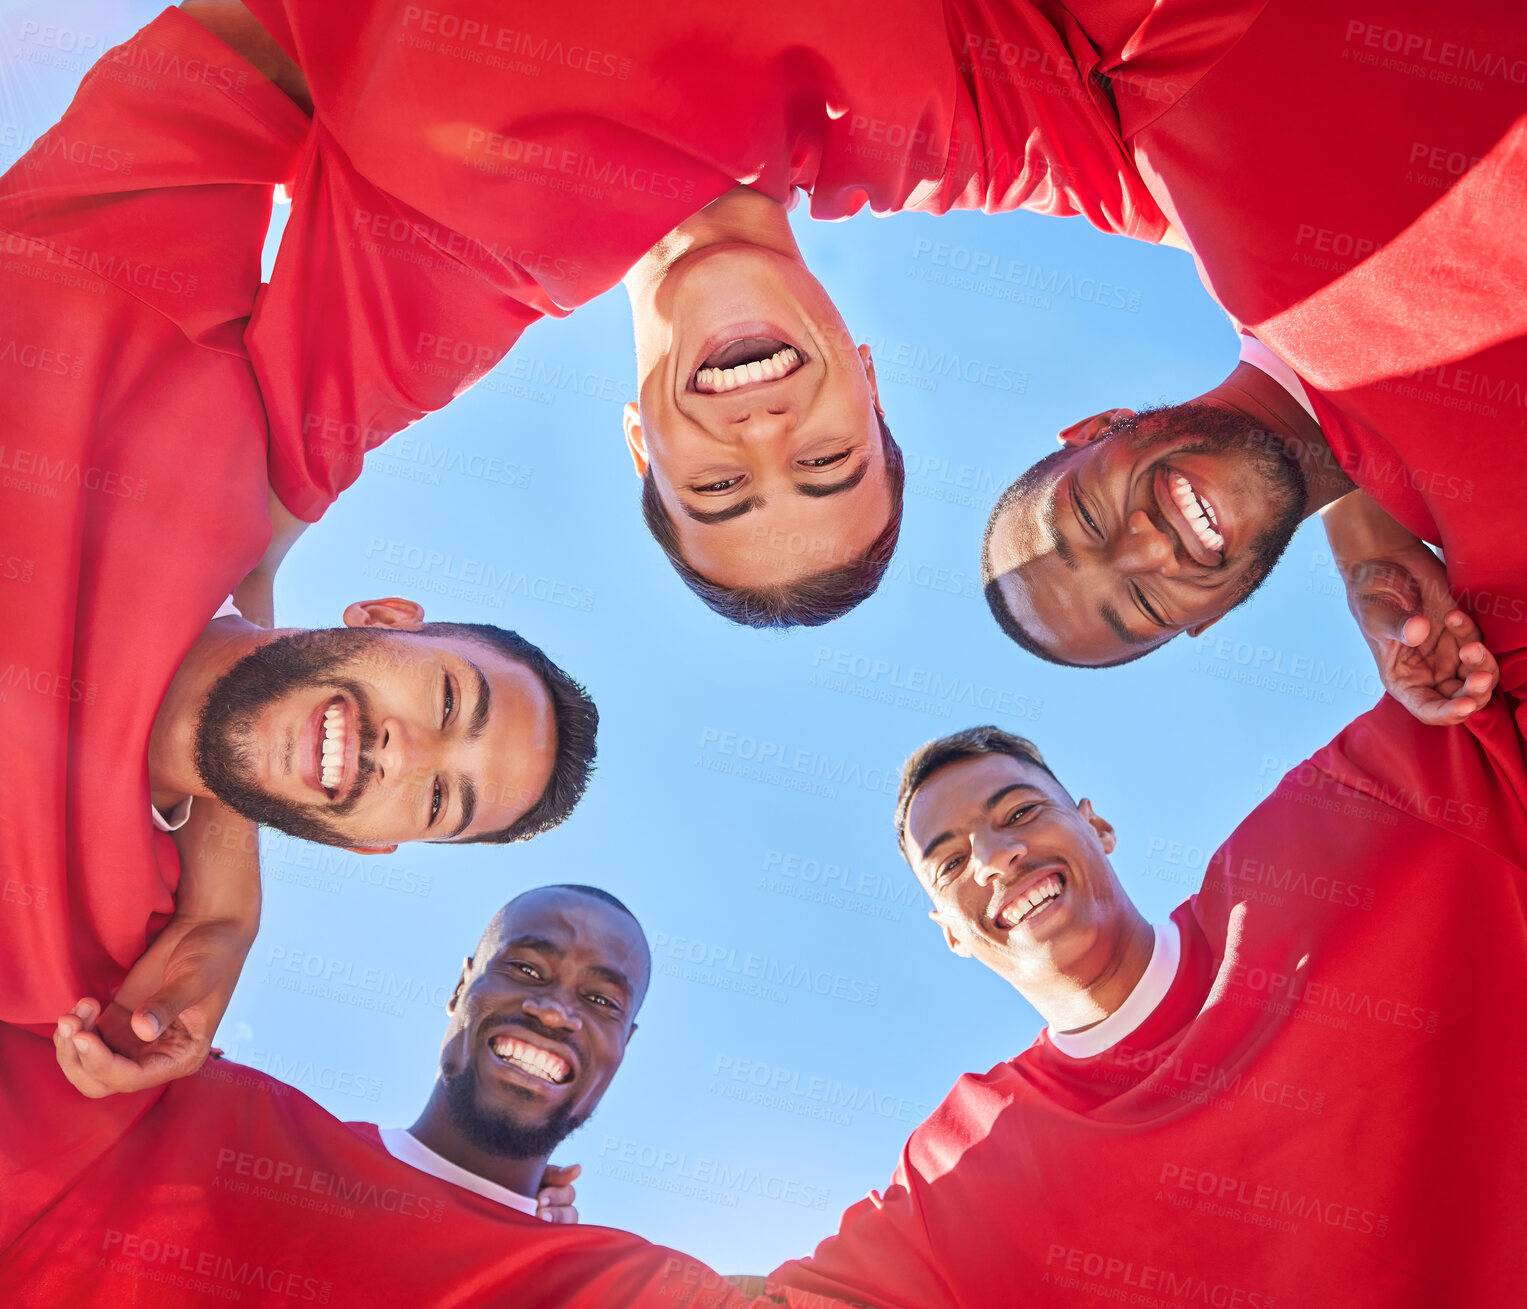 Buy stock photo Team, soccer and men huddle portrait excited for match day with motivation and smile together. Diversity, football and teamwork with happy athlete guys at game competition with low angle.

